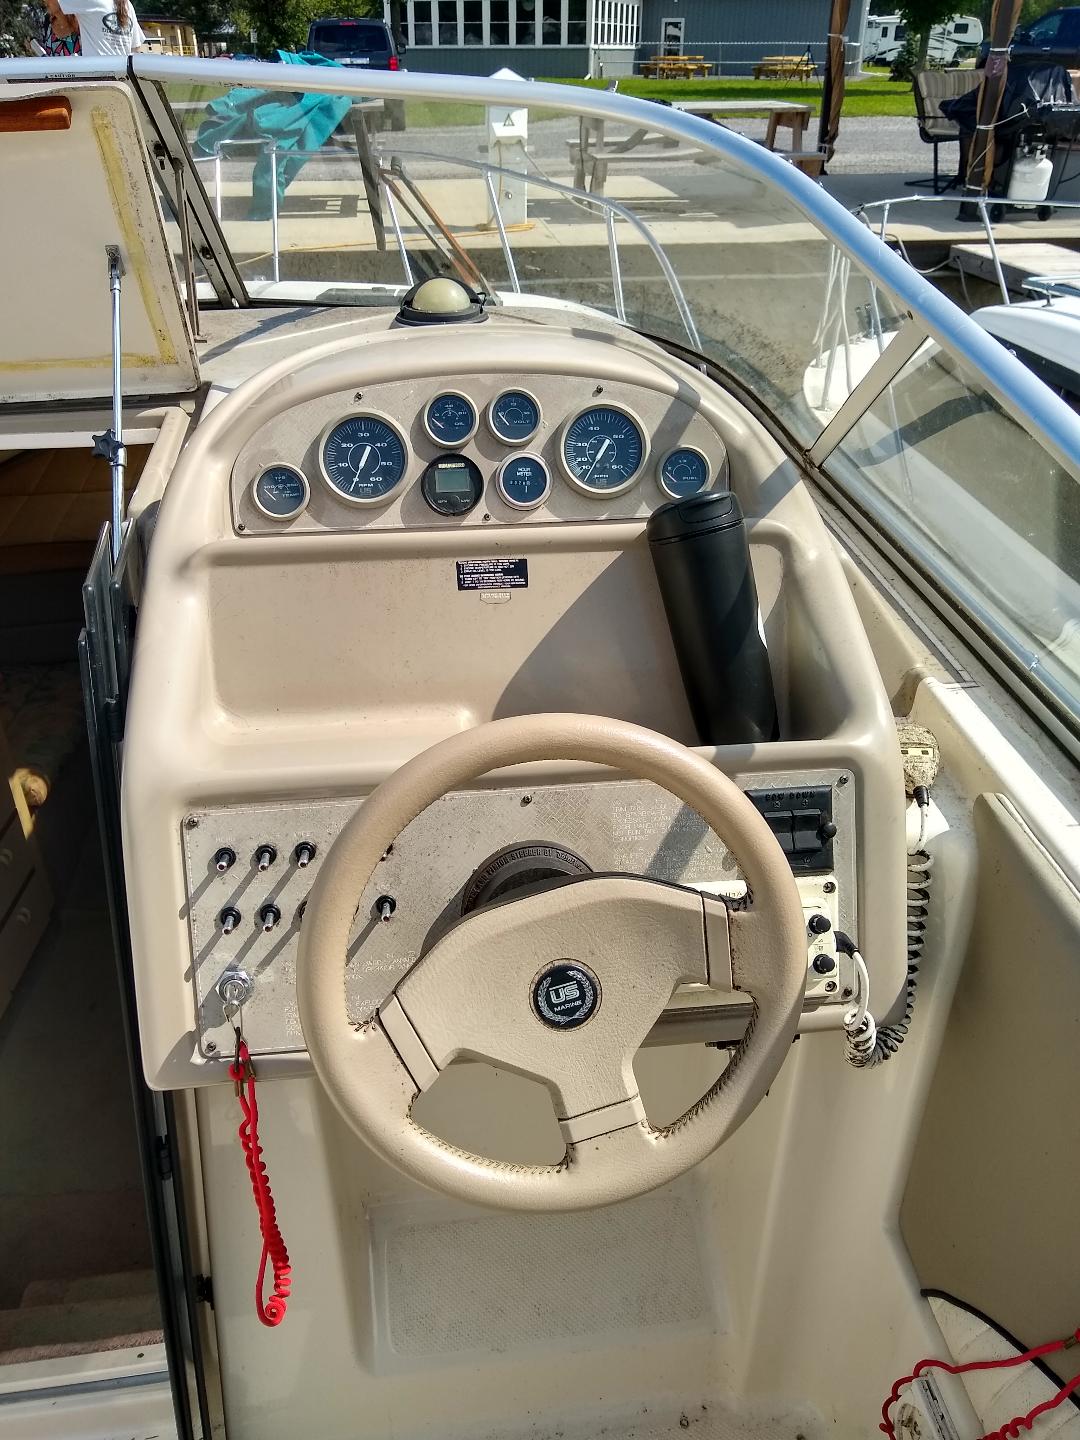 1995 Bayliner 2855 Power boat for sale in Brewerton, NY - image 2 